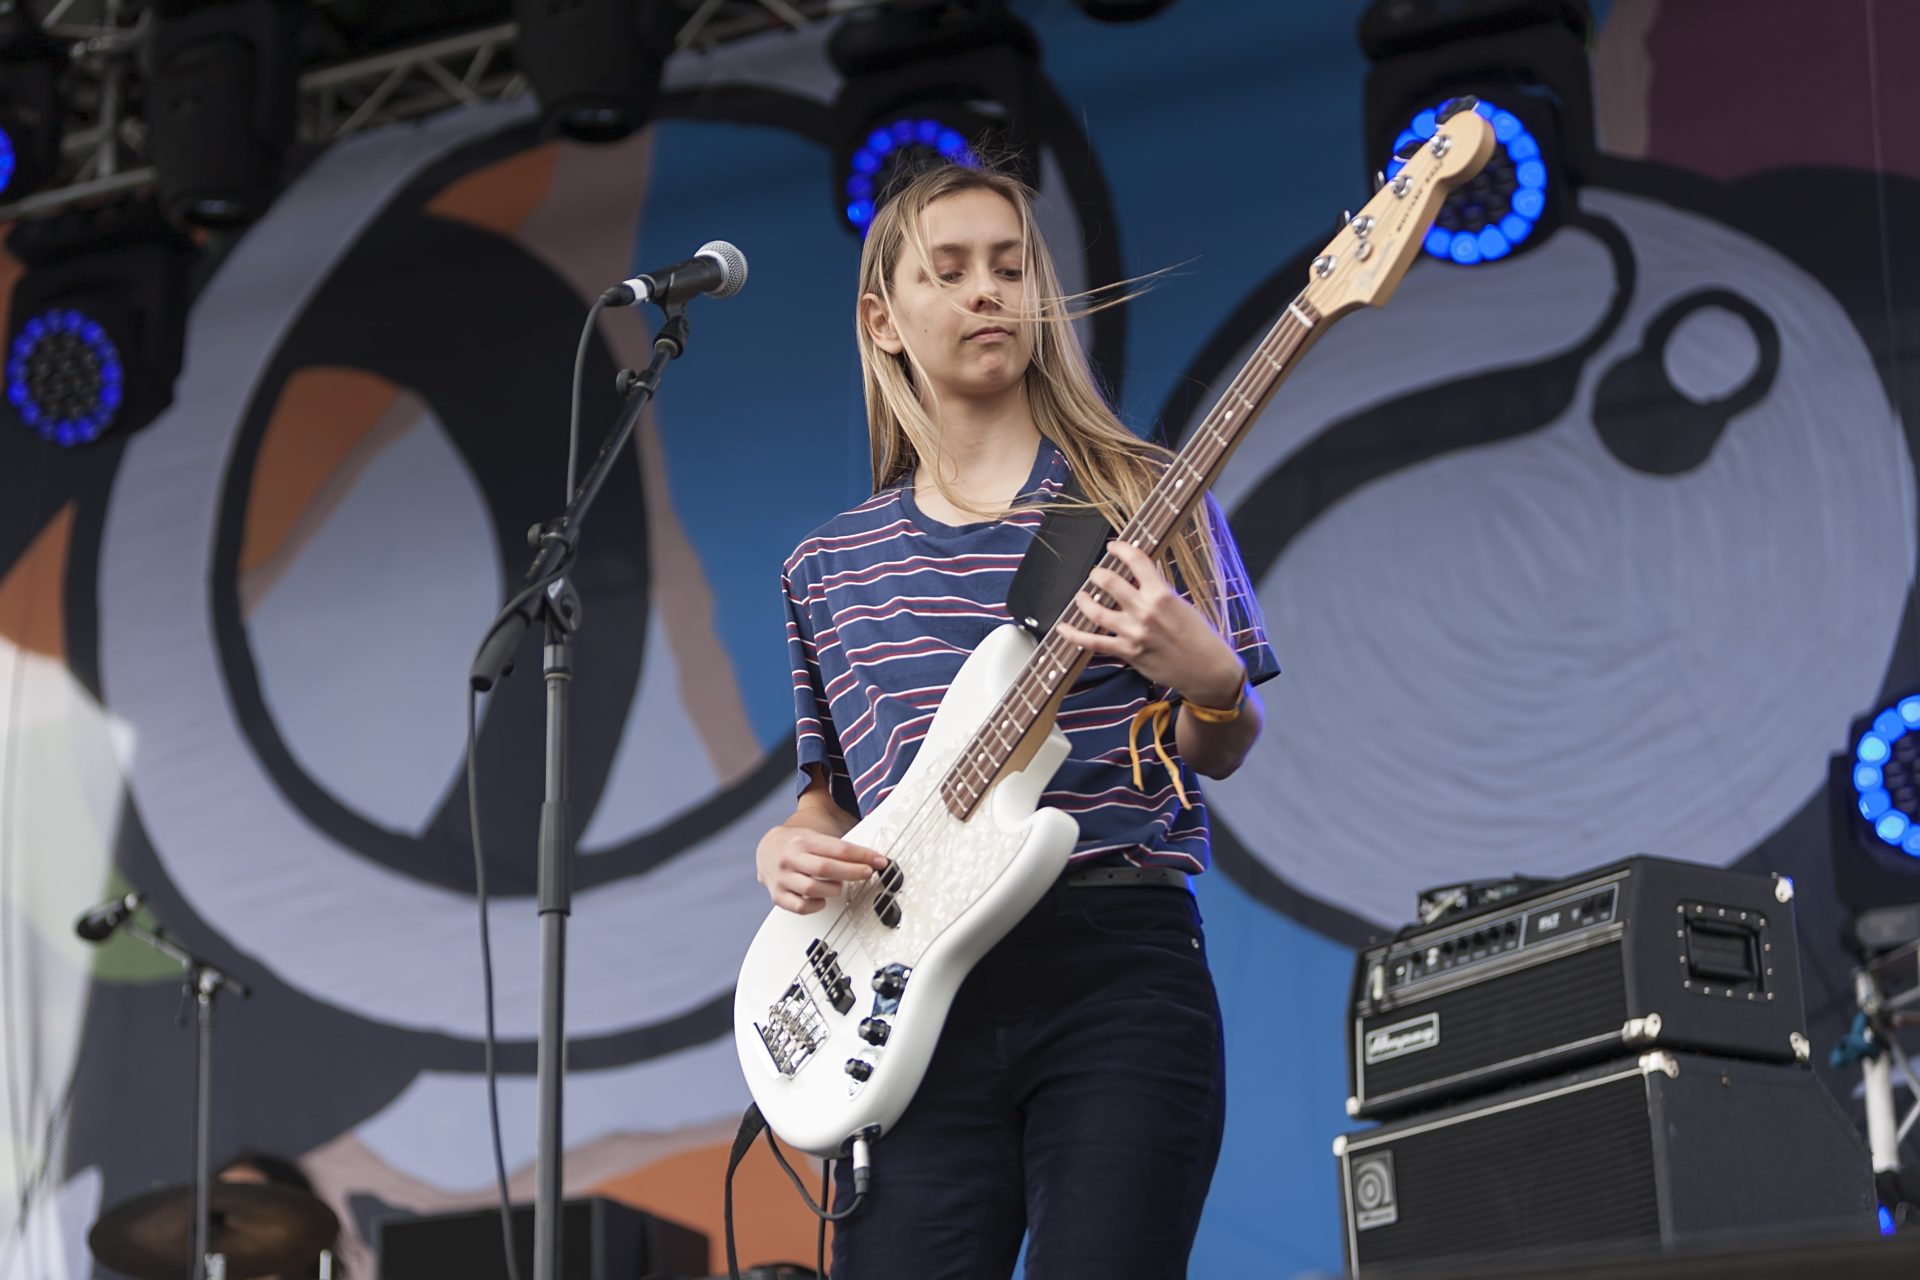 Spacey Jane @ Yours & Owls Festival, October ’19